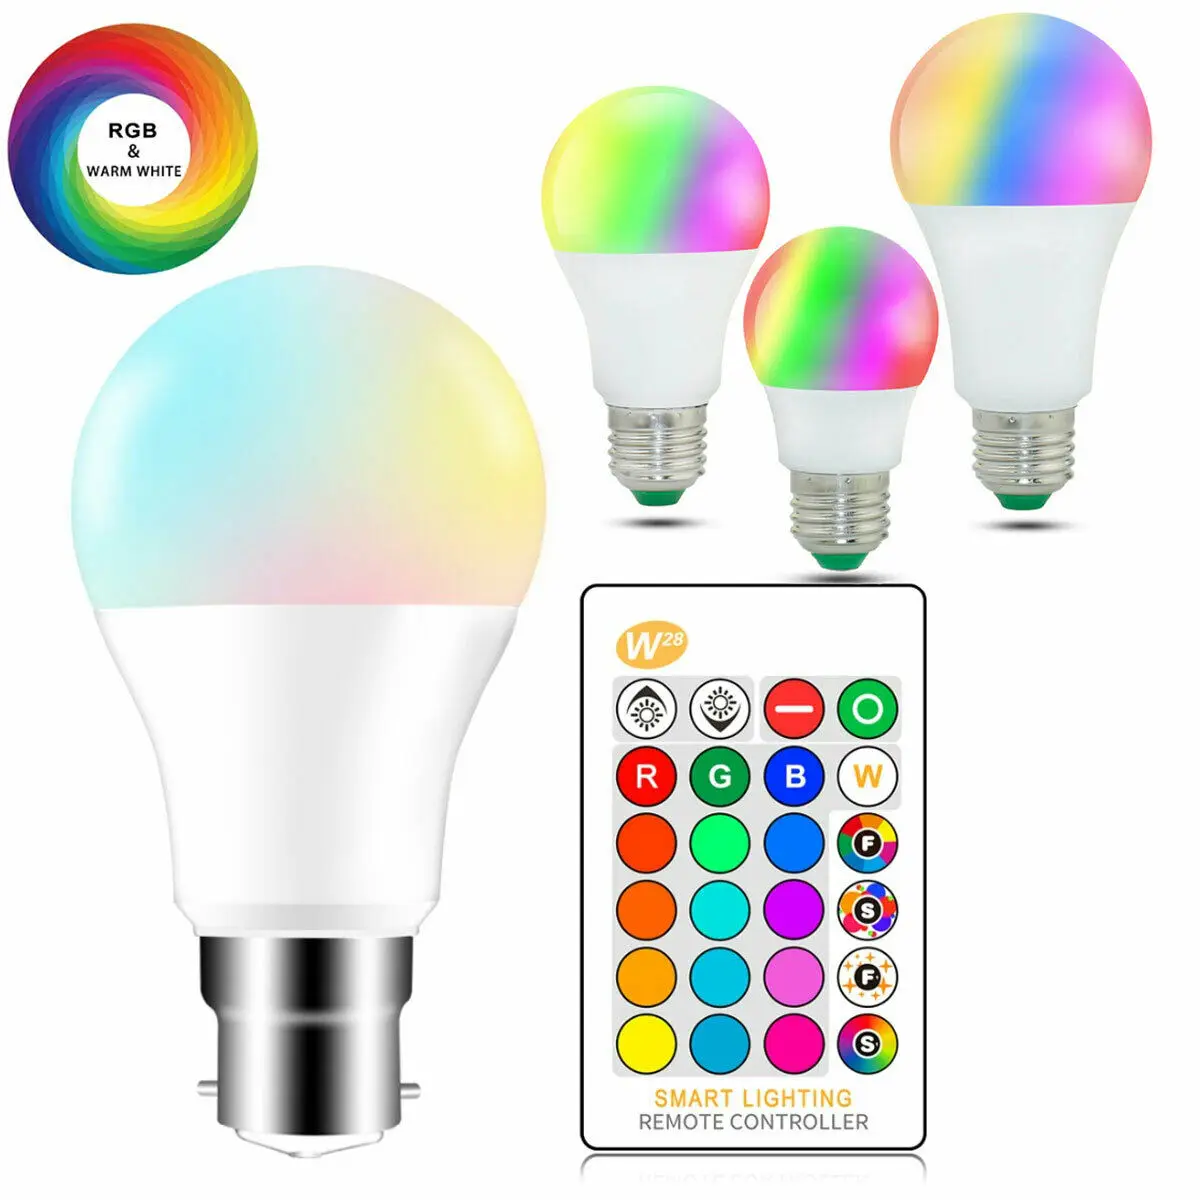 E27 B22 LED Bulbs Dimmable Color Changing RGB Magic LED Bulb 5W 10W 15W RGB Led Lamp Spotlight With IR Remote Control 16m color changing ampoule led e27 b22 magic smart bulb dimmable light lamp bulb rgb 20w wifi ir remote control spotlight